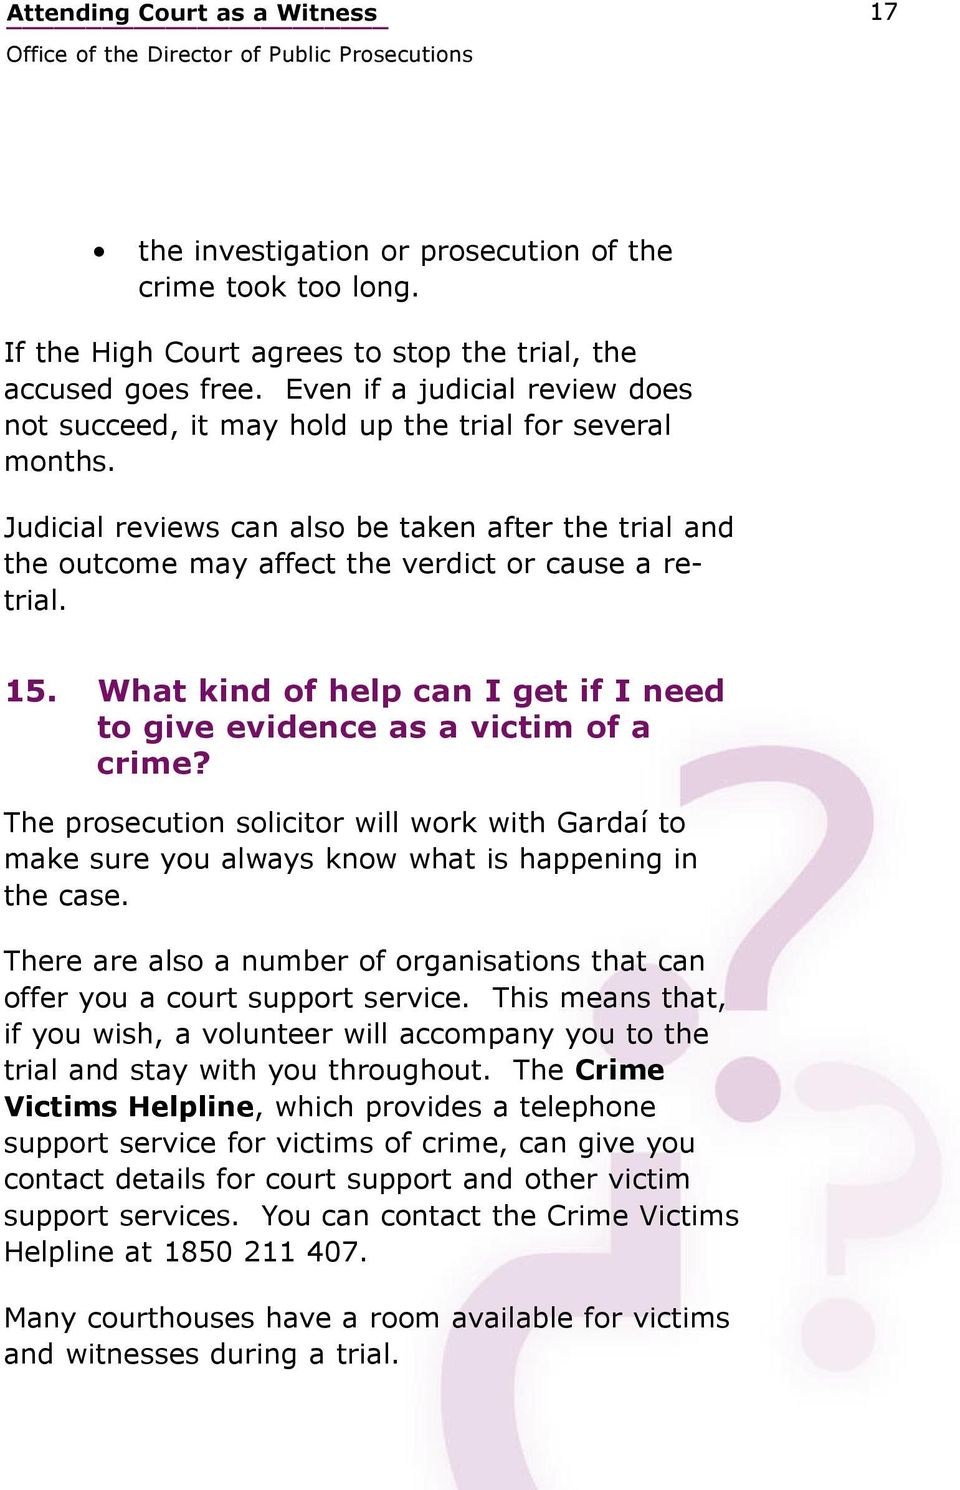 15. What kind of help can I get if I need to give evidence as a victim of a crime? The prosecution solicitor will work with Gardaí to make sure you always know what is happening in the case.